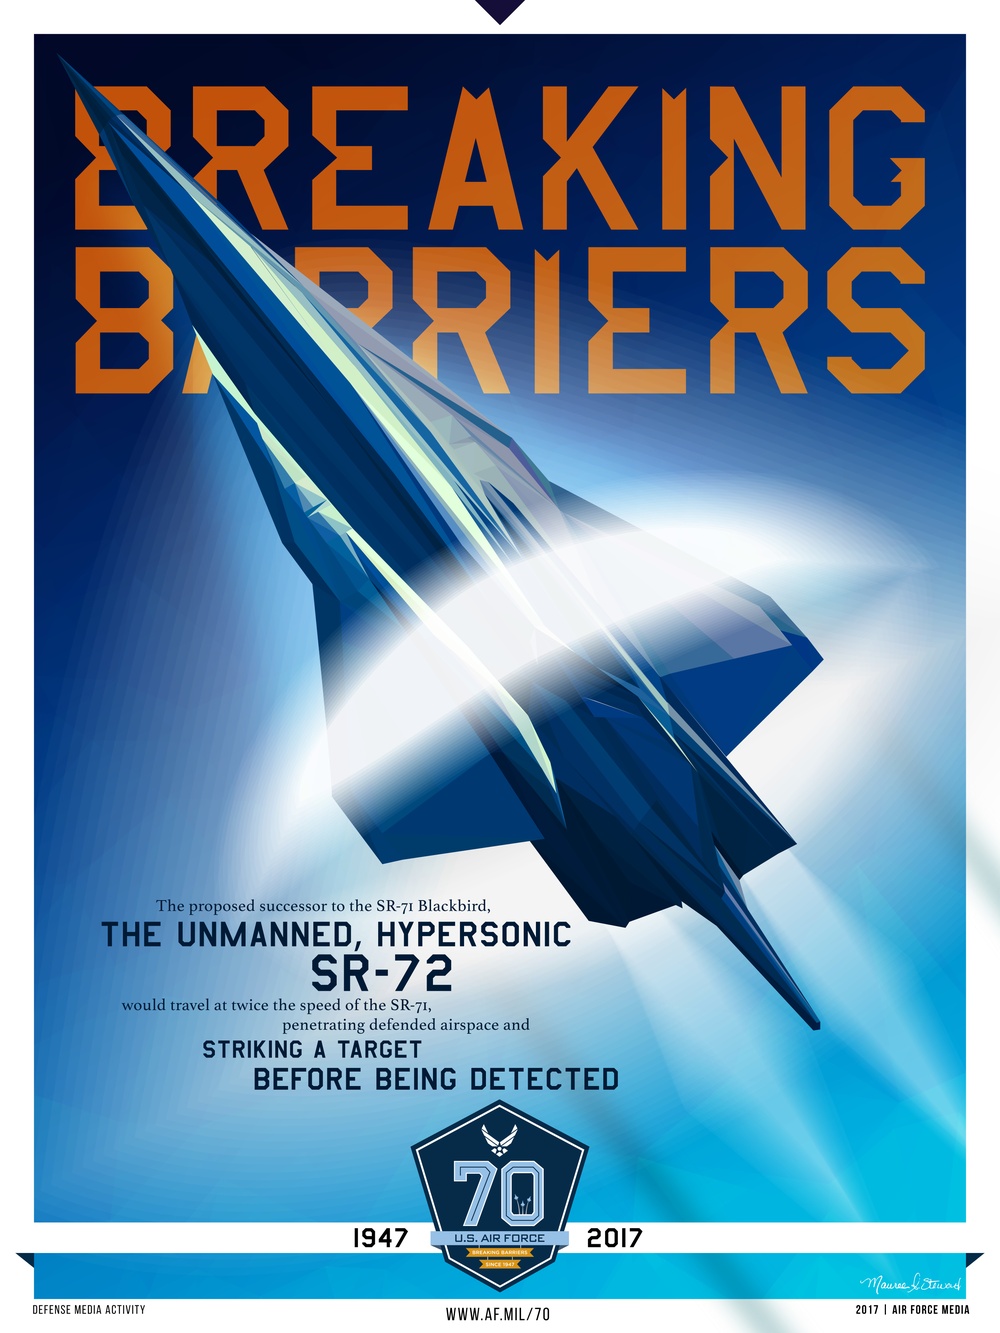 Breaking Barriers-the SR-72 (8 of 8)